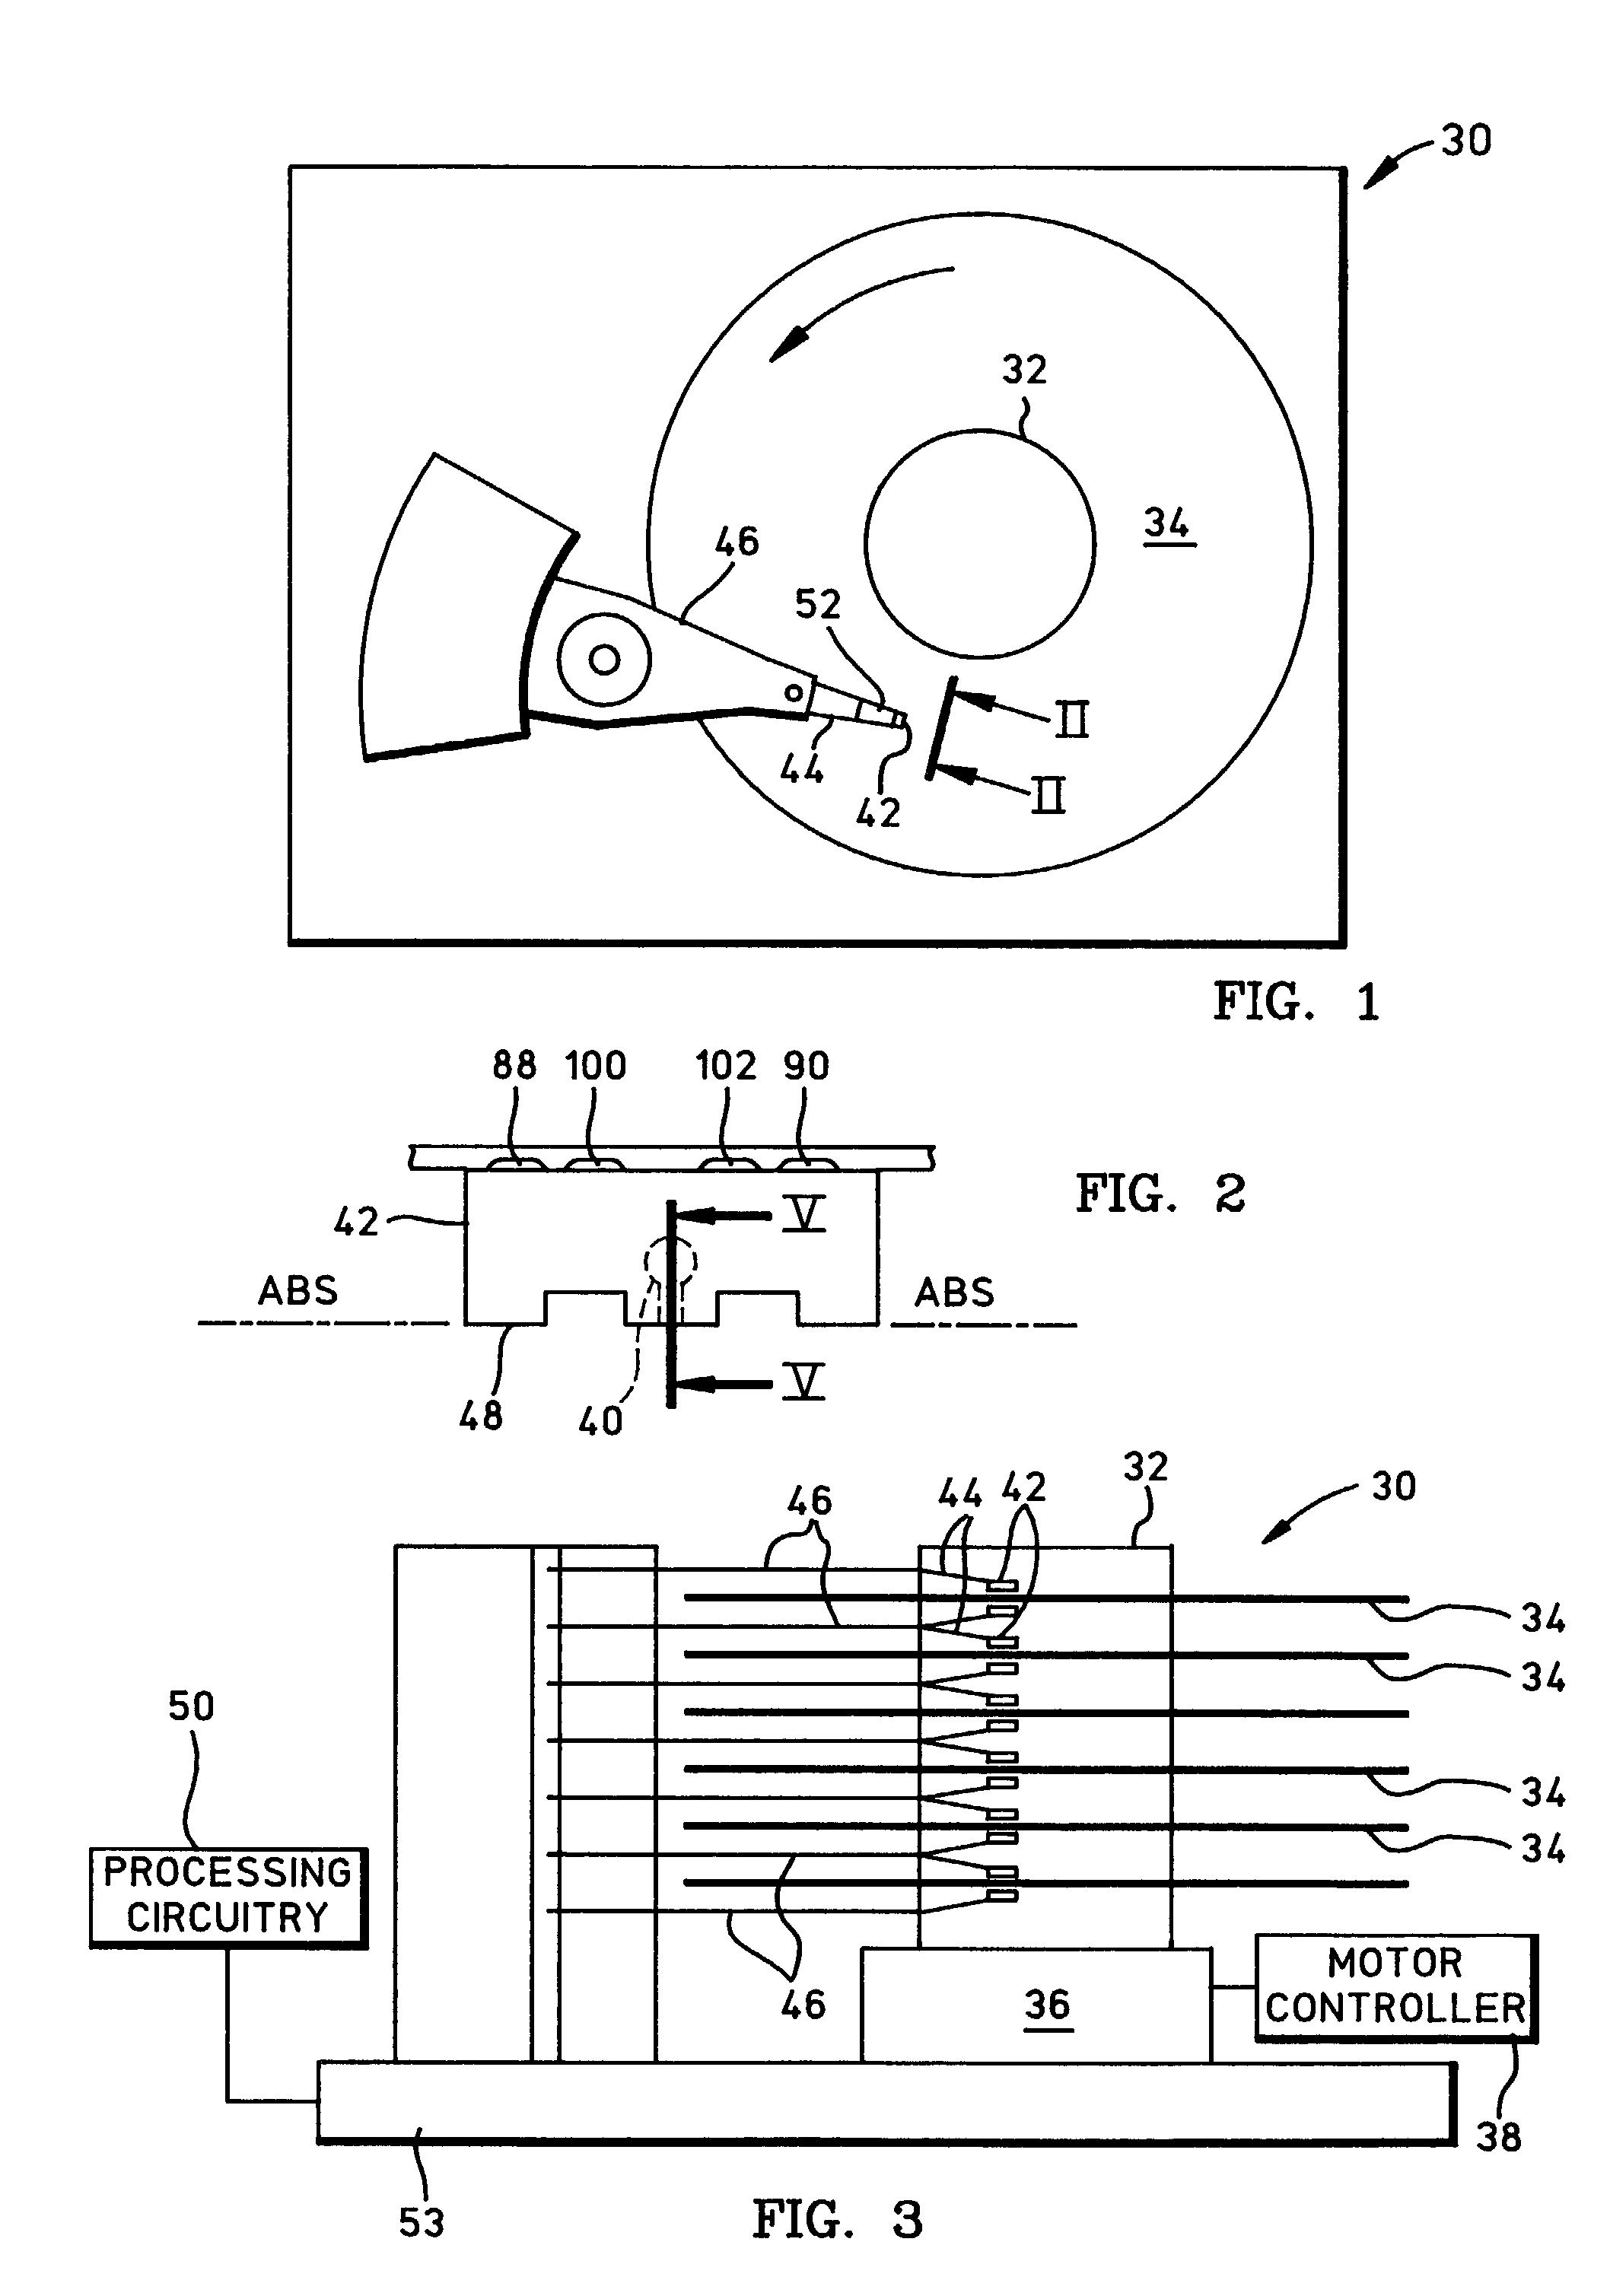 Magnetic head having a heater circuit for thermally-assisted writing